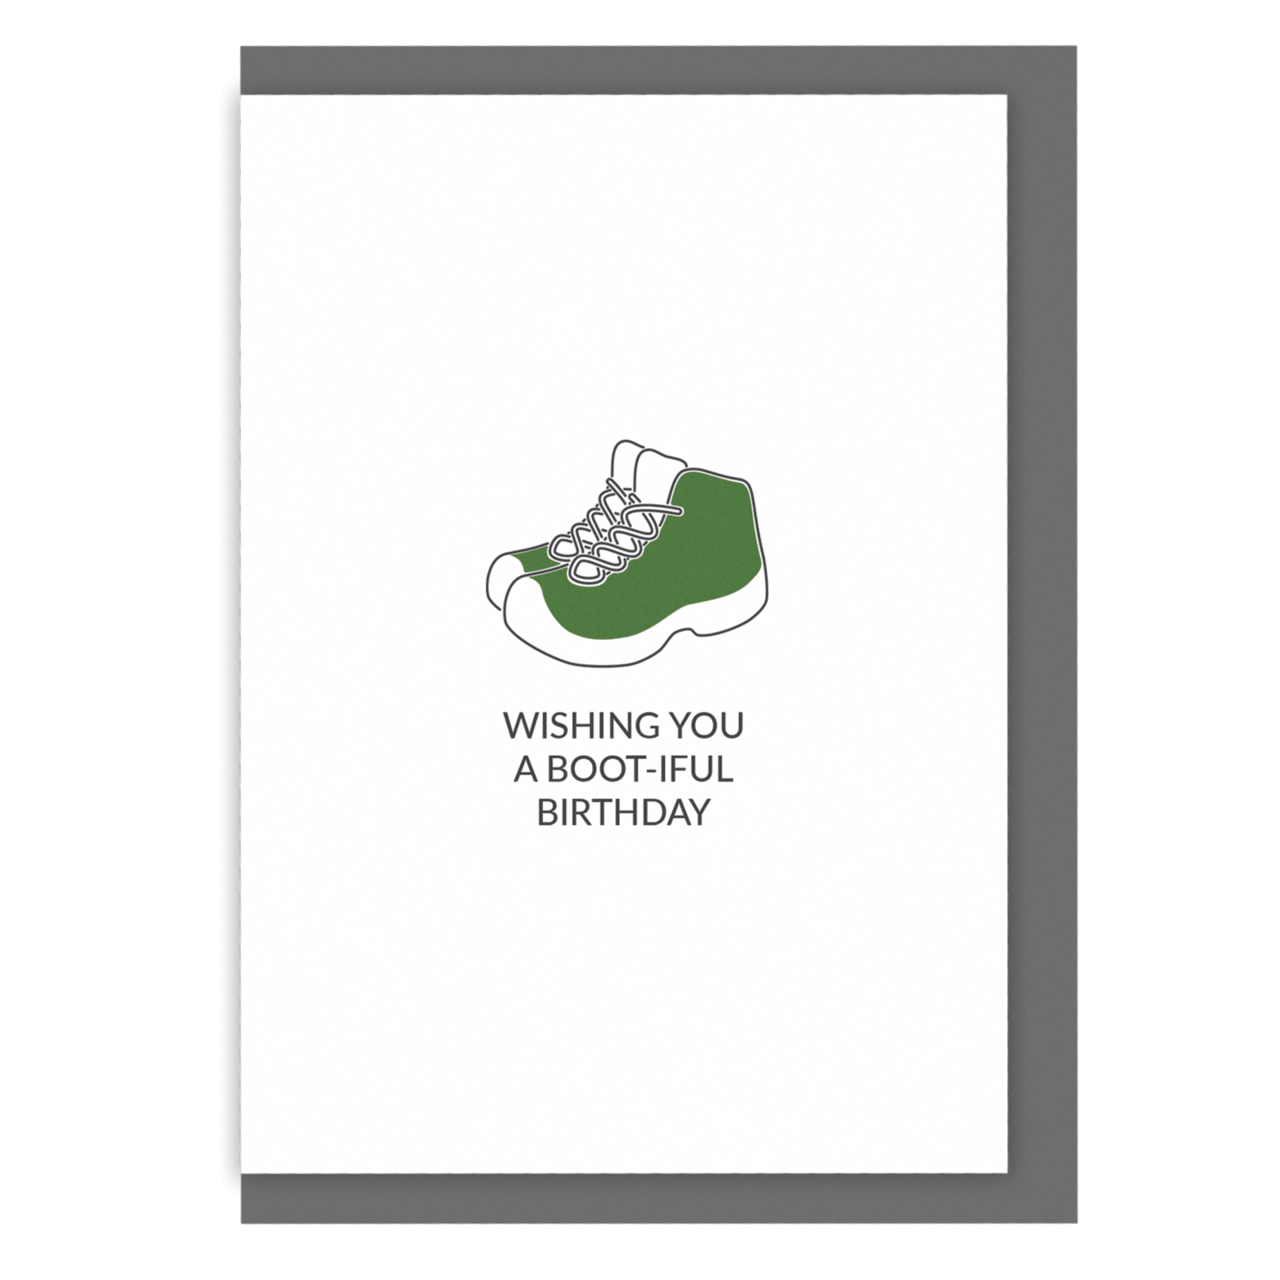 Outdoors lover birthday card wishing you a boot-iful birthday